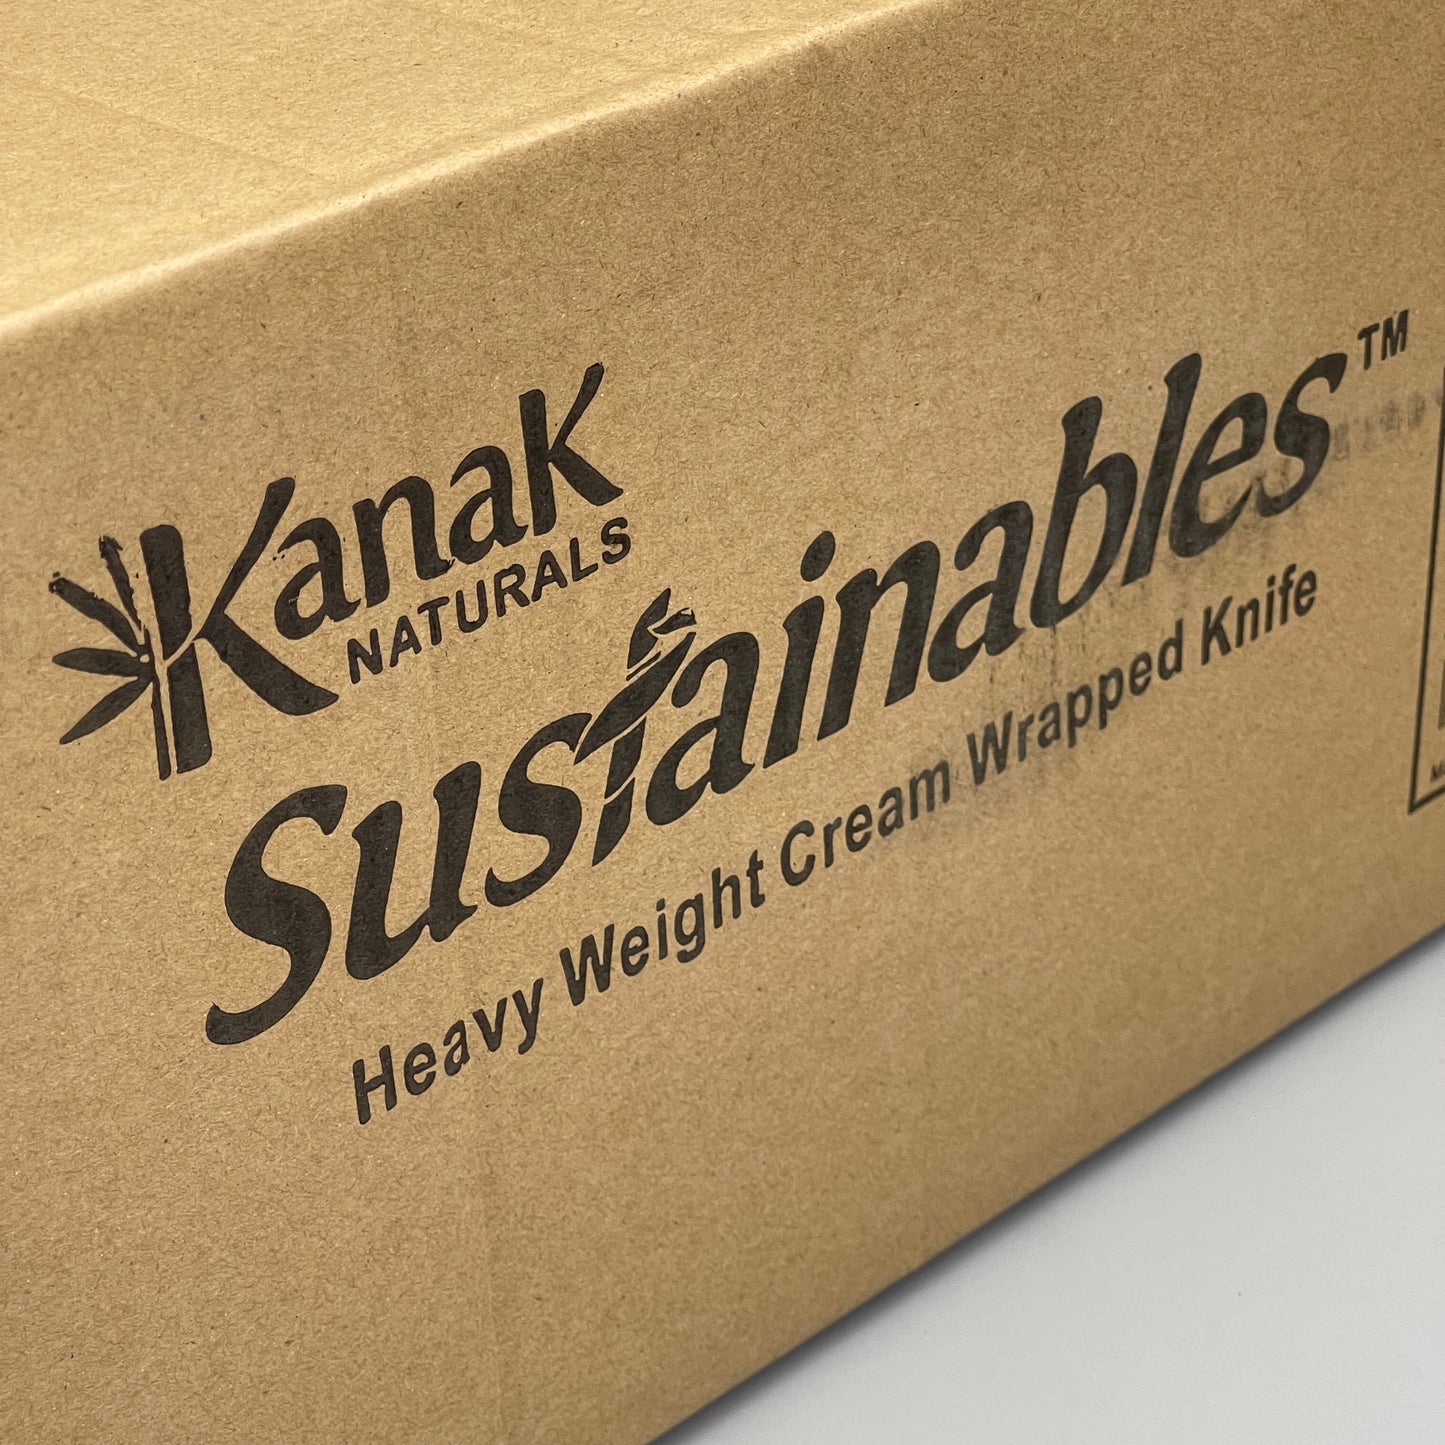 KANAK NATURALS (1,000 KNIVES) Heavy Weight Flexible Plastic Knife Individually Wrapped Cream PC6201